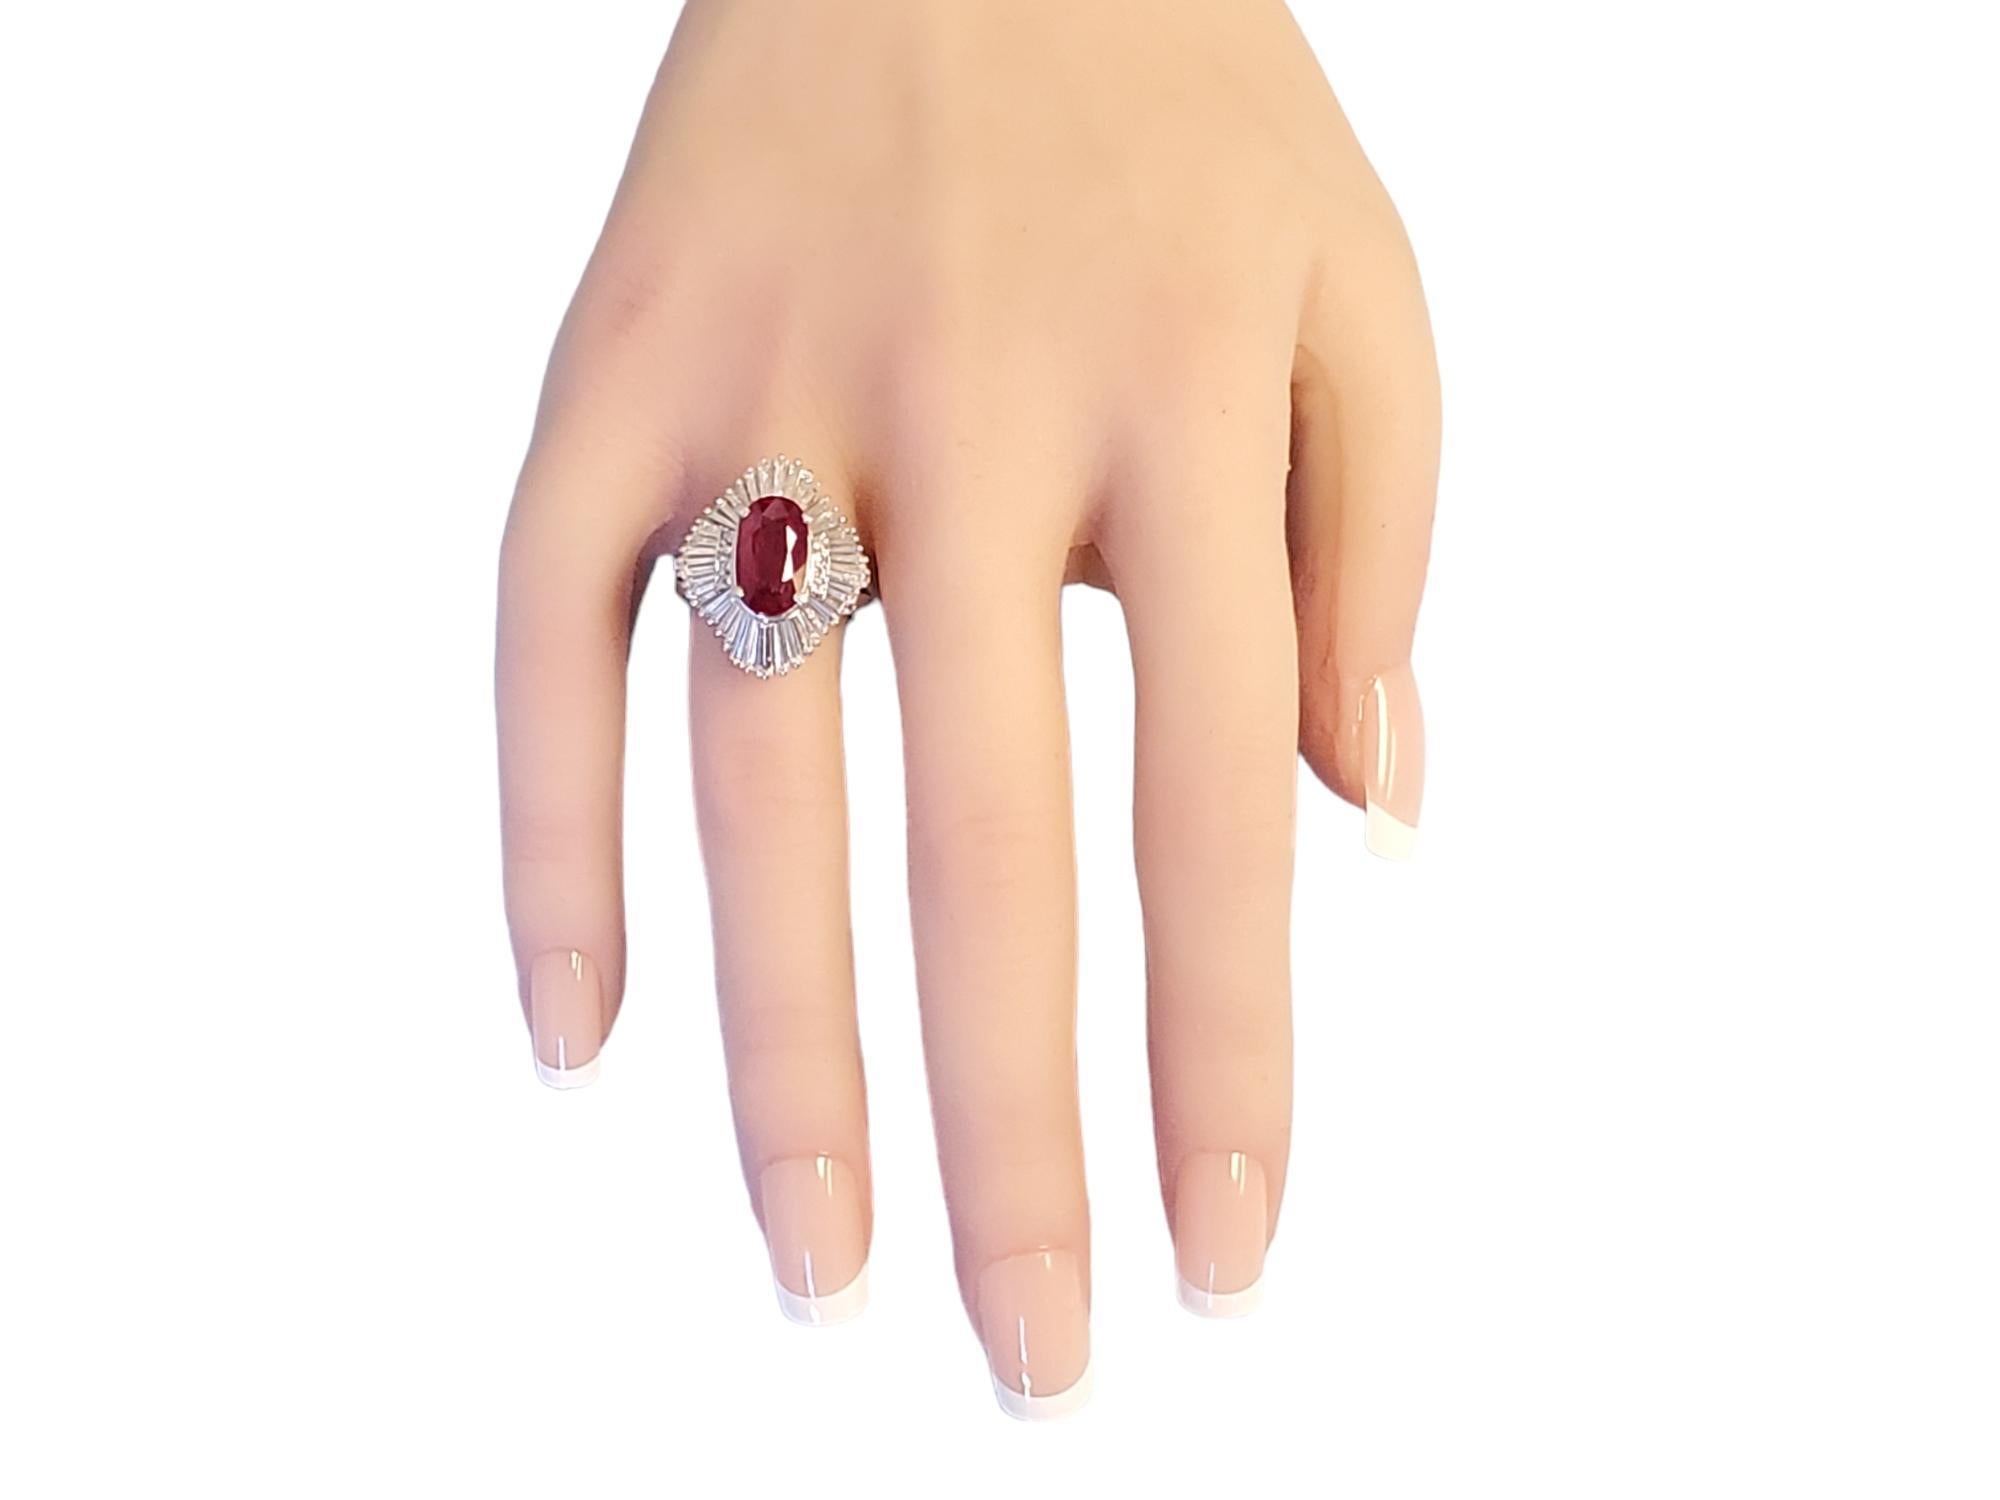 Estate Burma vivid red pigeons blood ruby as stated on GIA report. This is a very rare stone to find, let alone at this price. The long oval is 3.19ct and it faces up more like a 4ct+ stone. 1.78tcw colorless VS diamonds surround the ruby in heavy